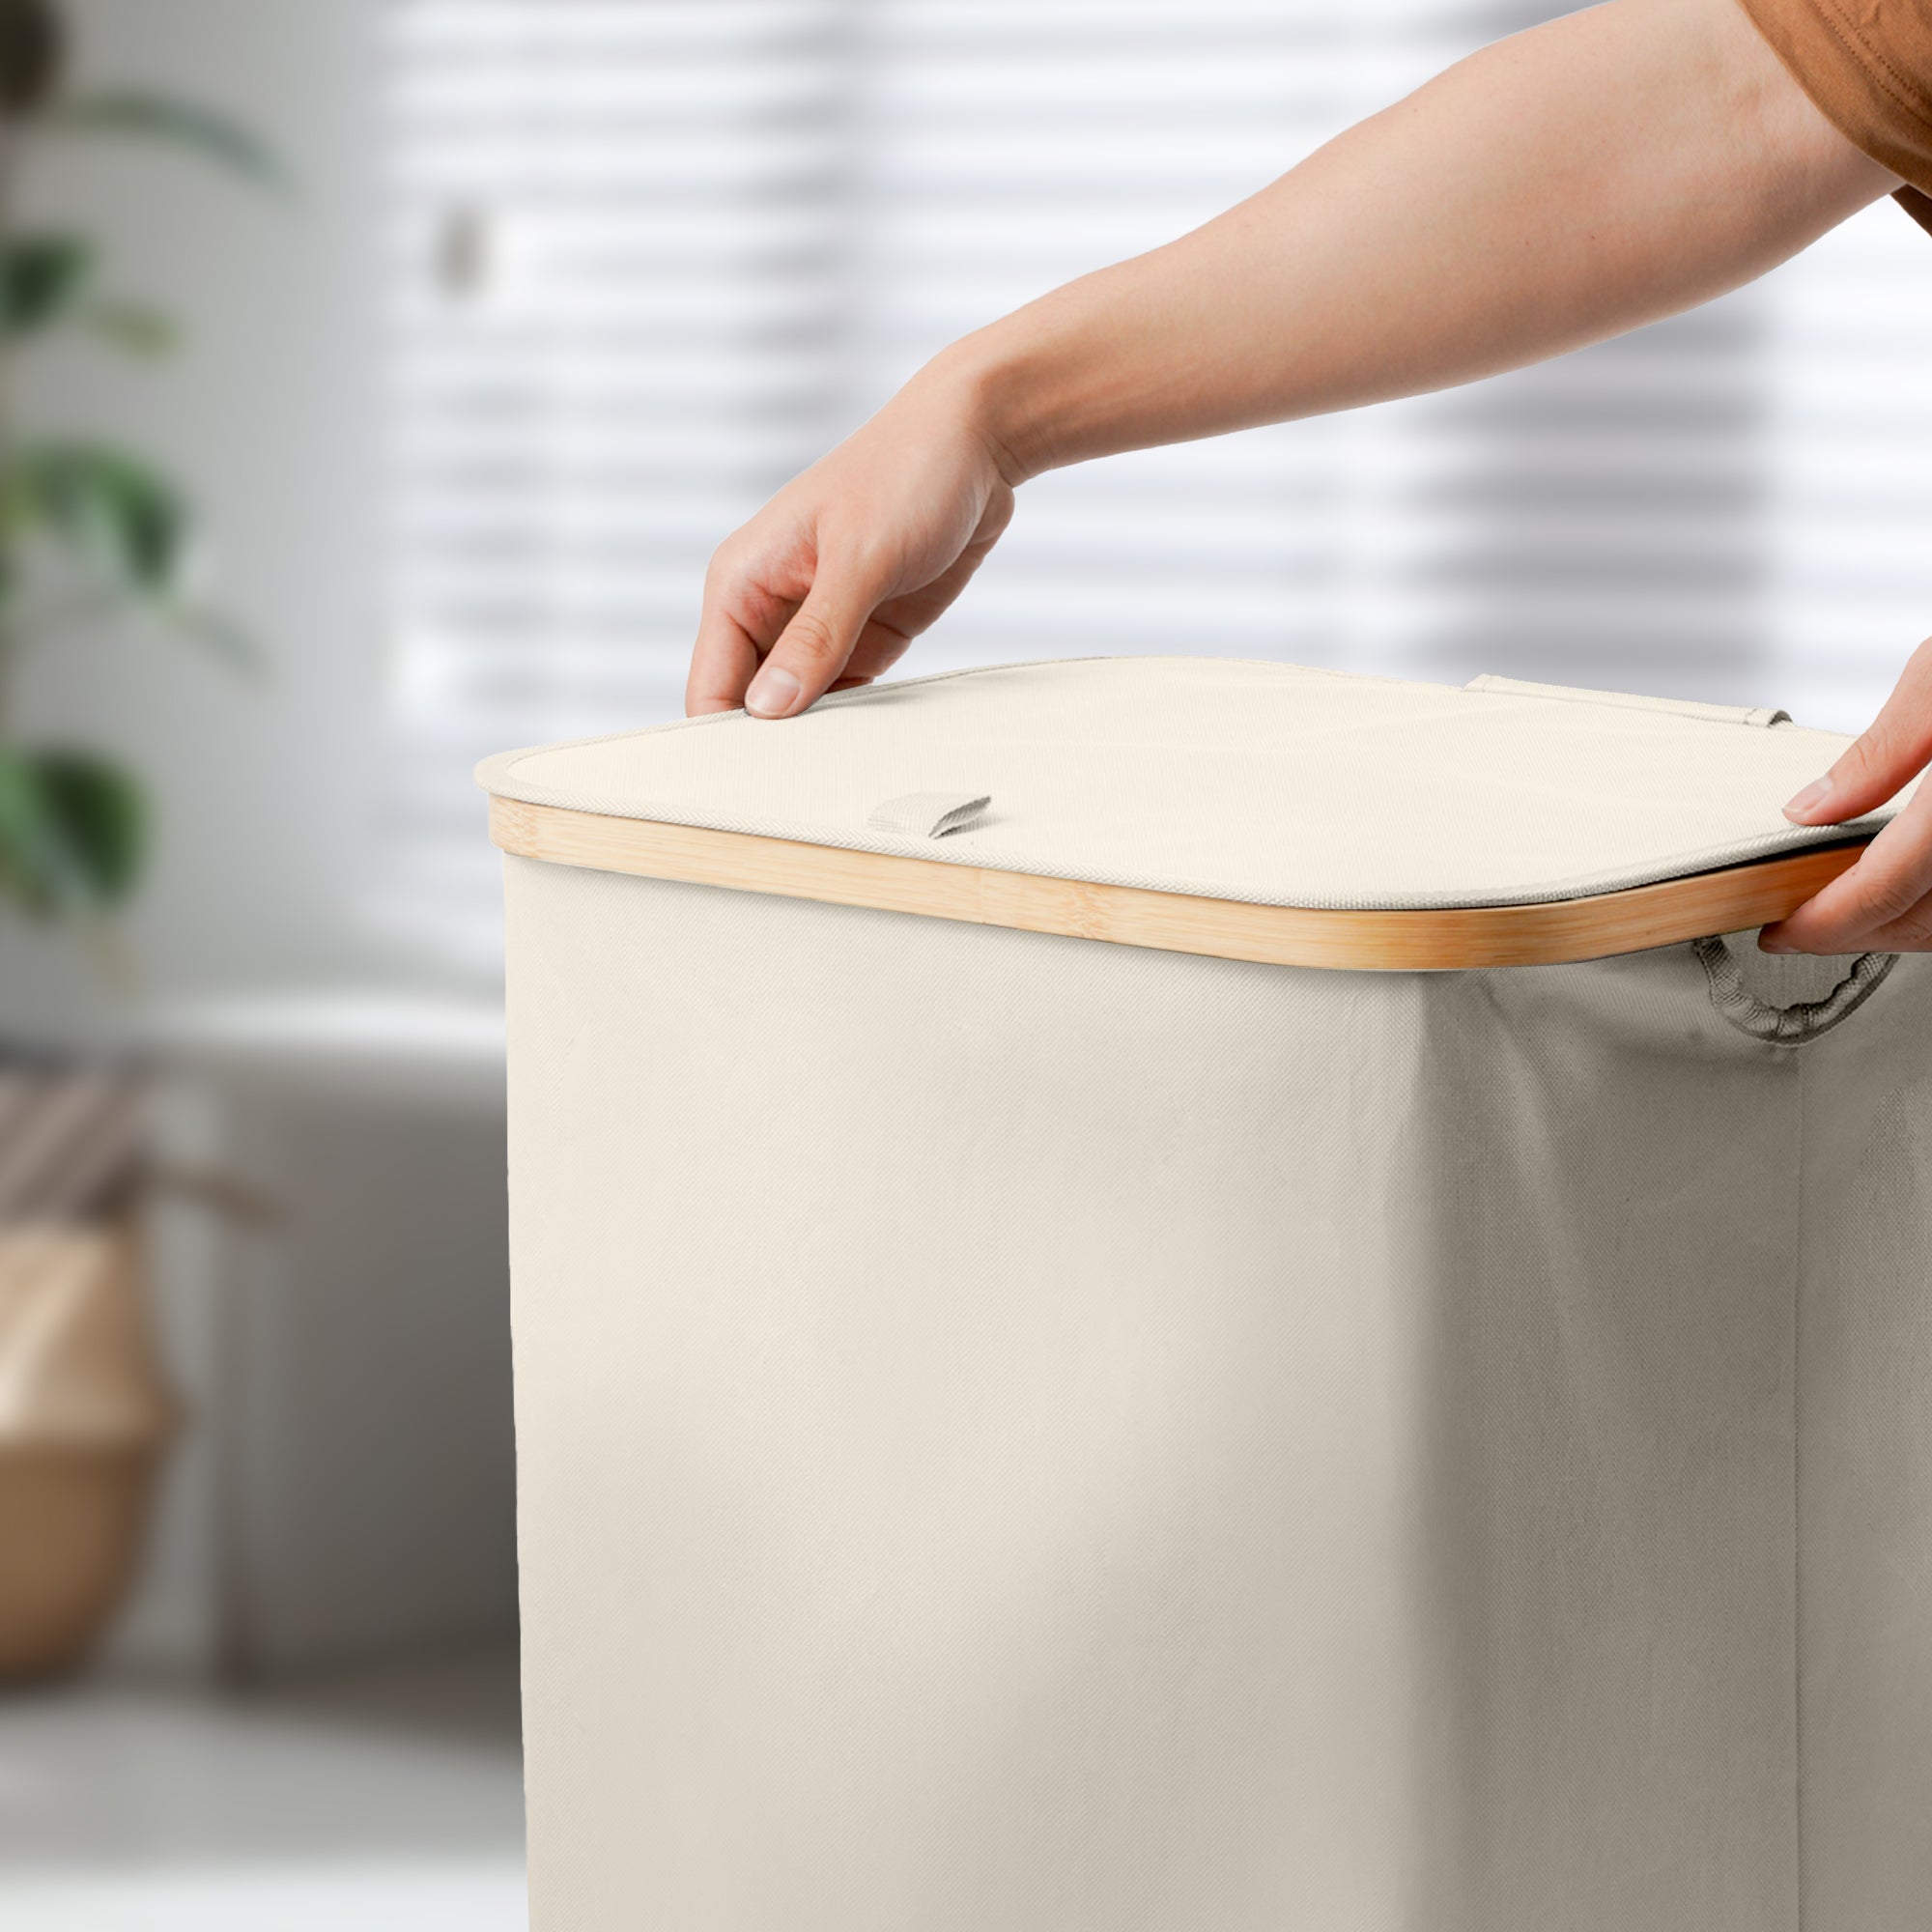 Laundry Basket - 145L Capacity with Handles and Machine Washable Removable Bags